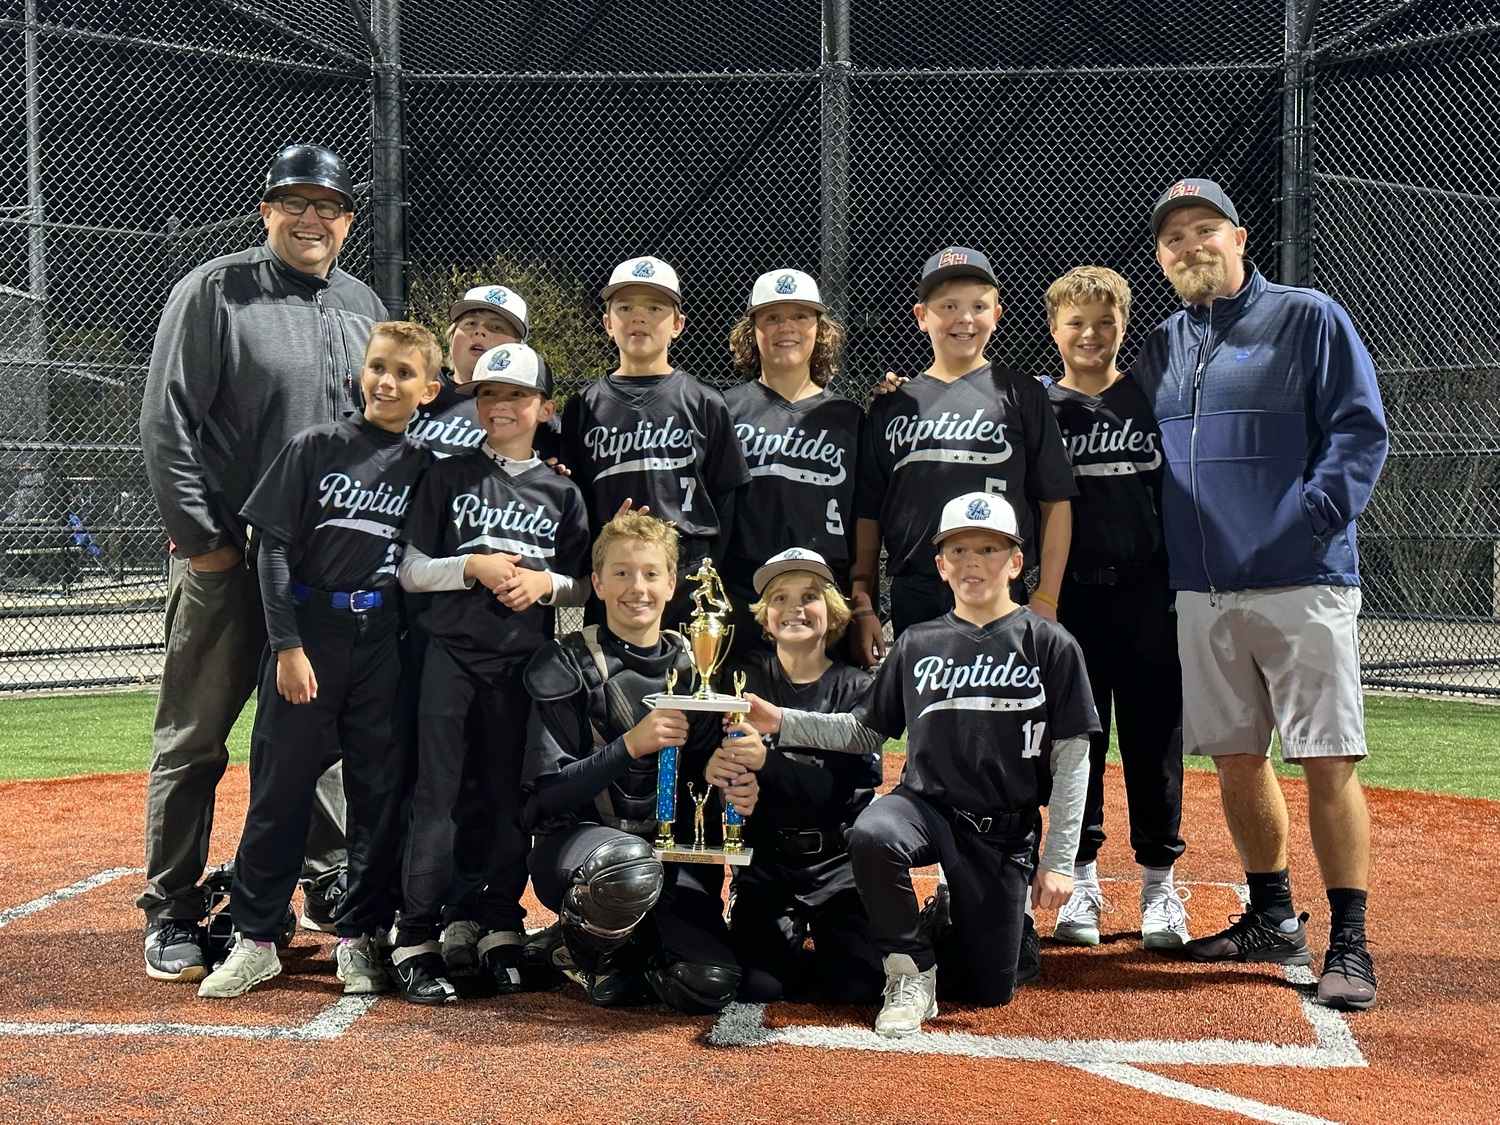 HUB 44's 11-and-under Riptides baseball team won Brookhaven Town's Elite Invitational Tournament this past weekend.